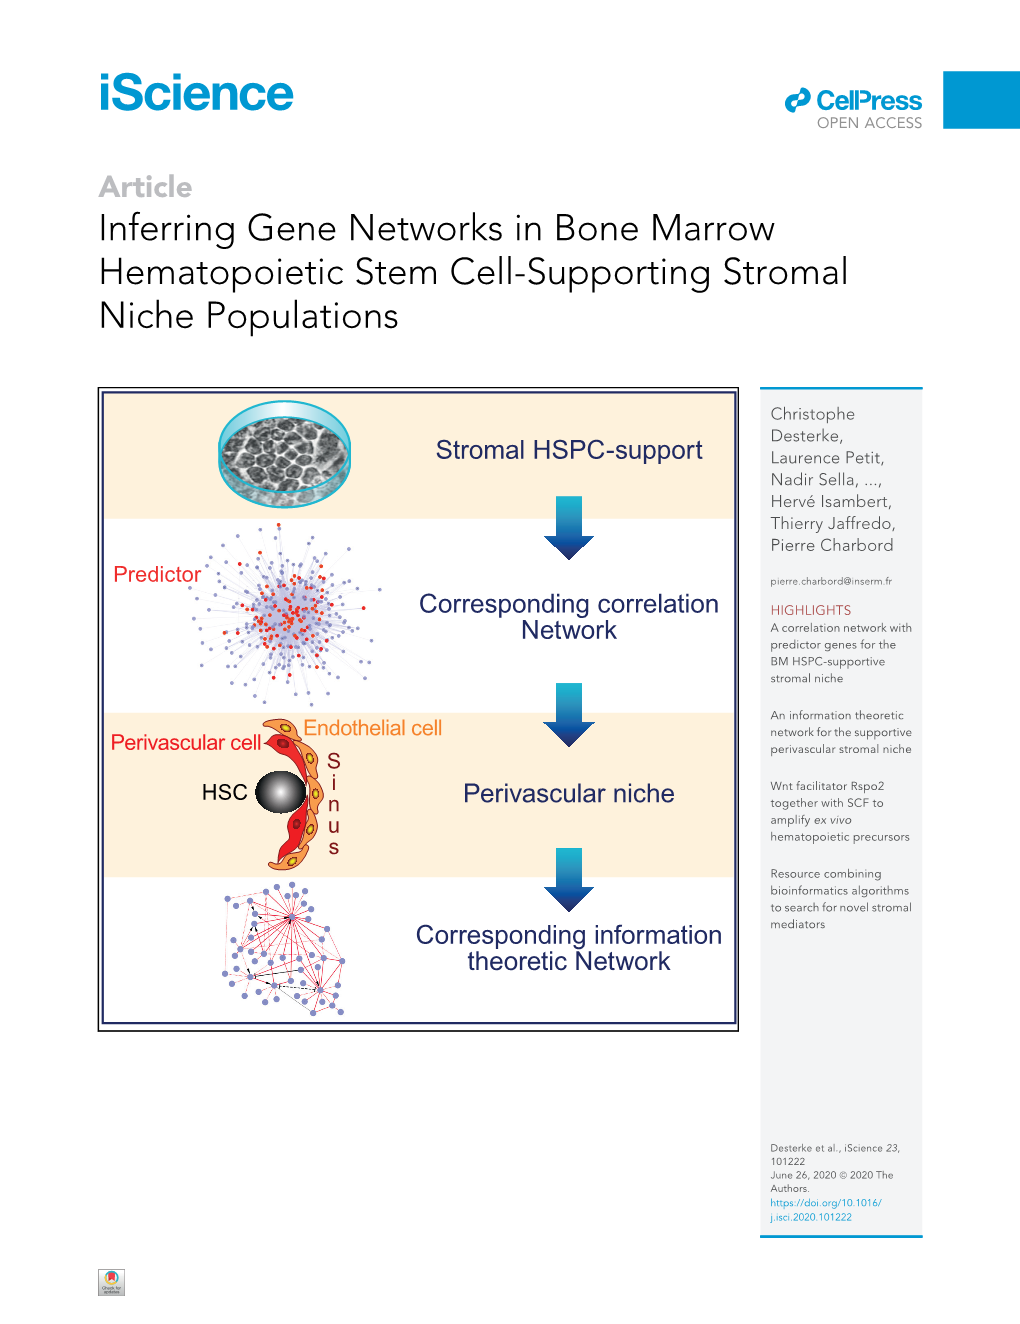 Inferring Gene Networks in Bone Marrow Hematopoietic Stem Cell-Supporting Stromal Niche Populations